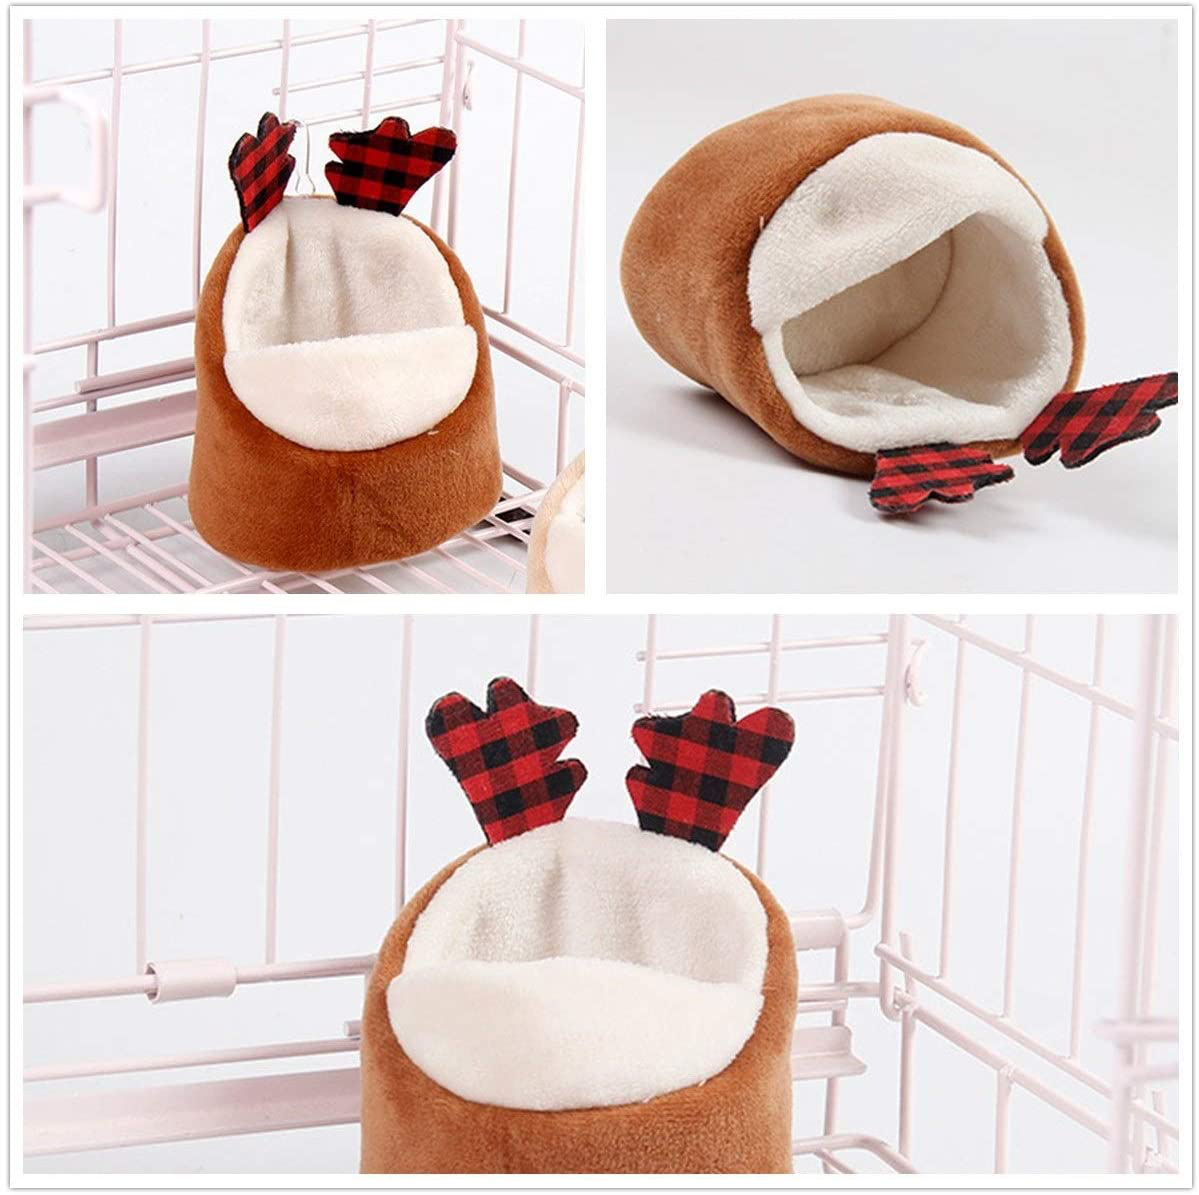 Cooshou 2PCS Hamster Mini Bed, Warm Small Pets Animals House Bedding, Cozy Nest Cage Accessories, Lightweight Cotton Sofa for Dwarf Hamster